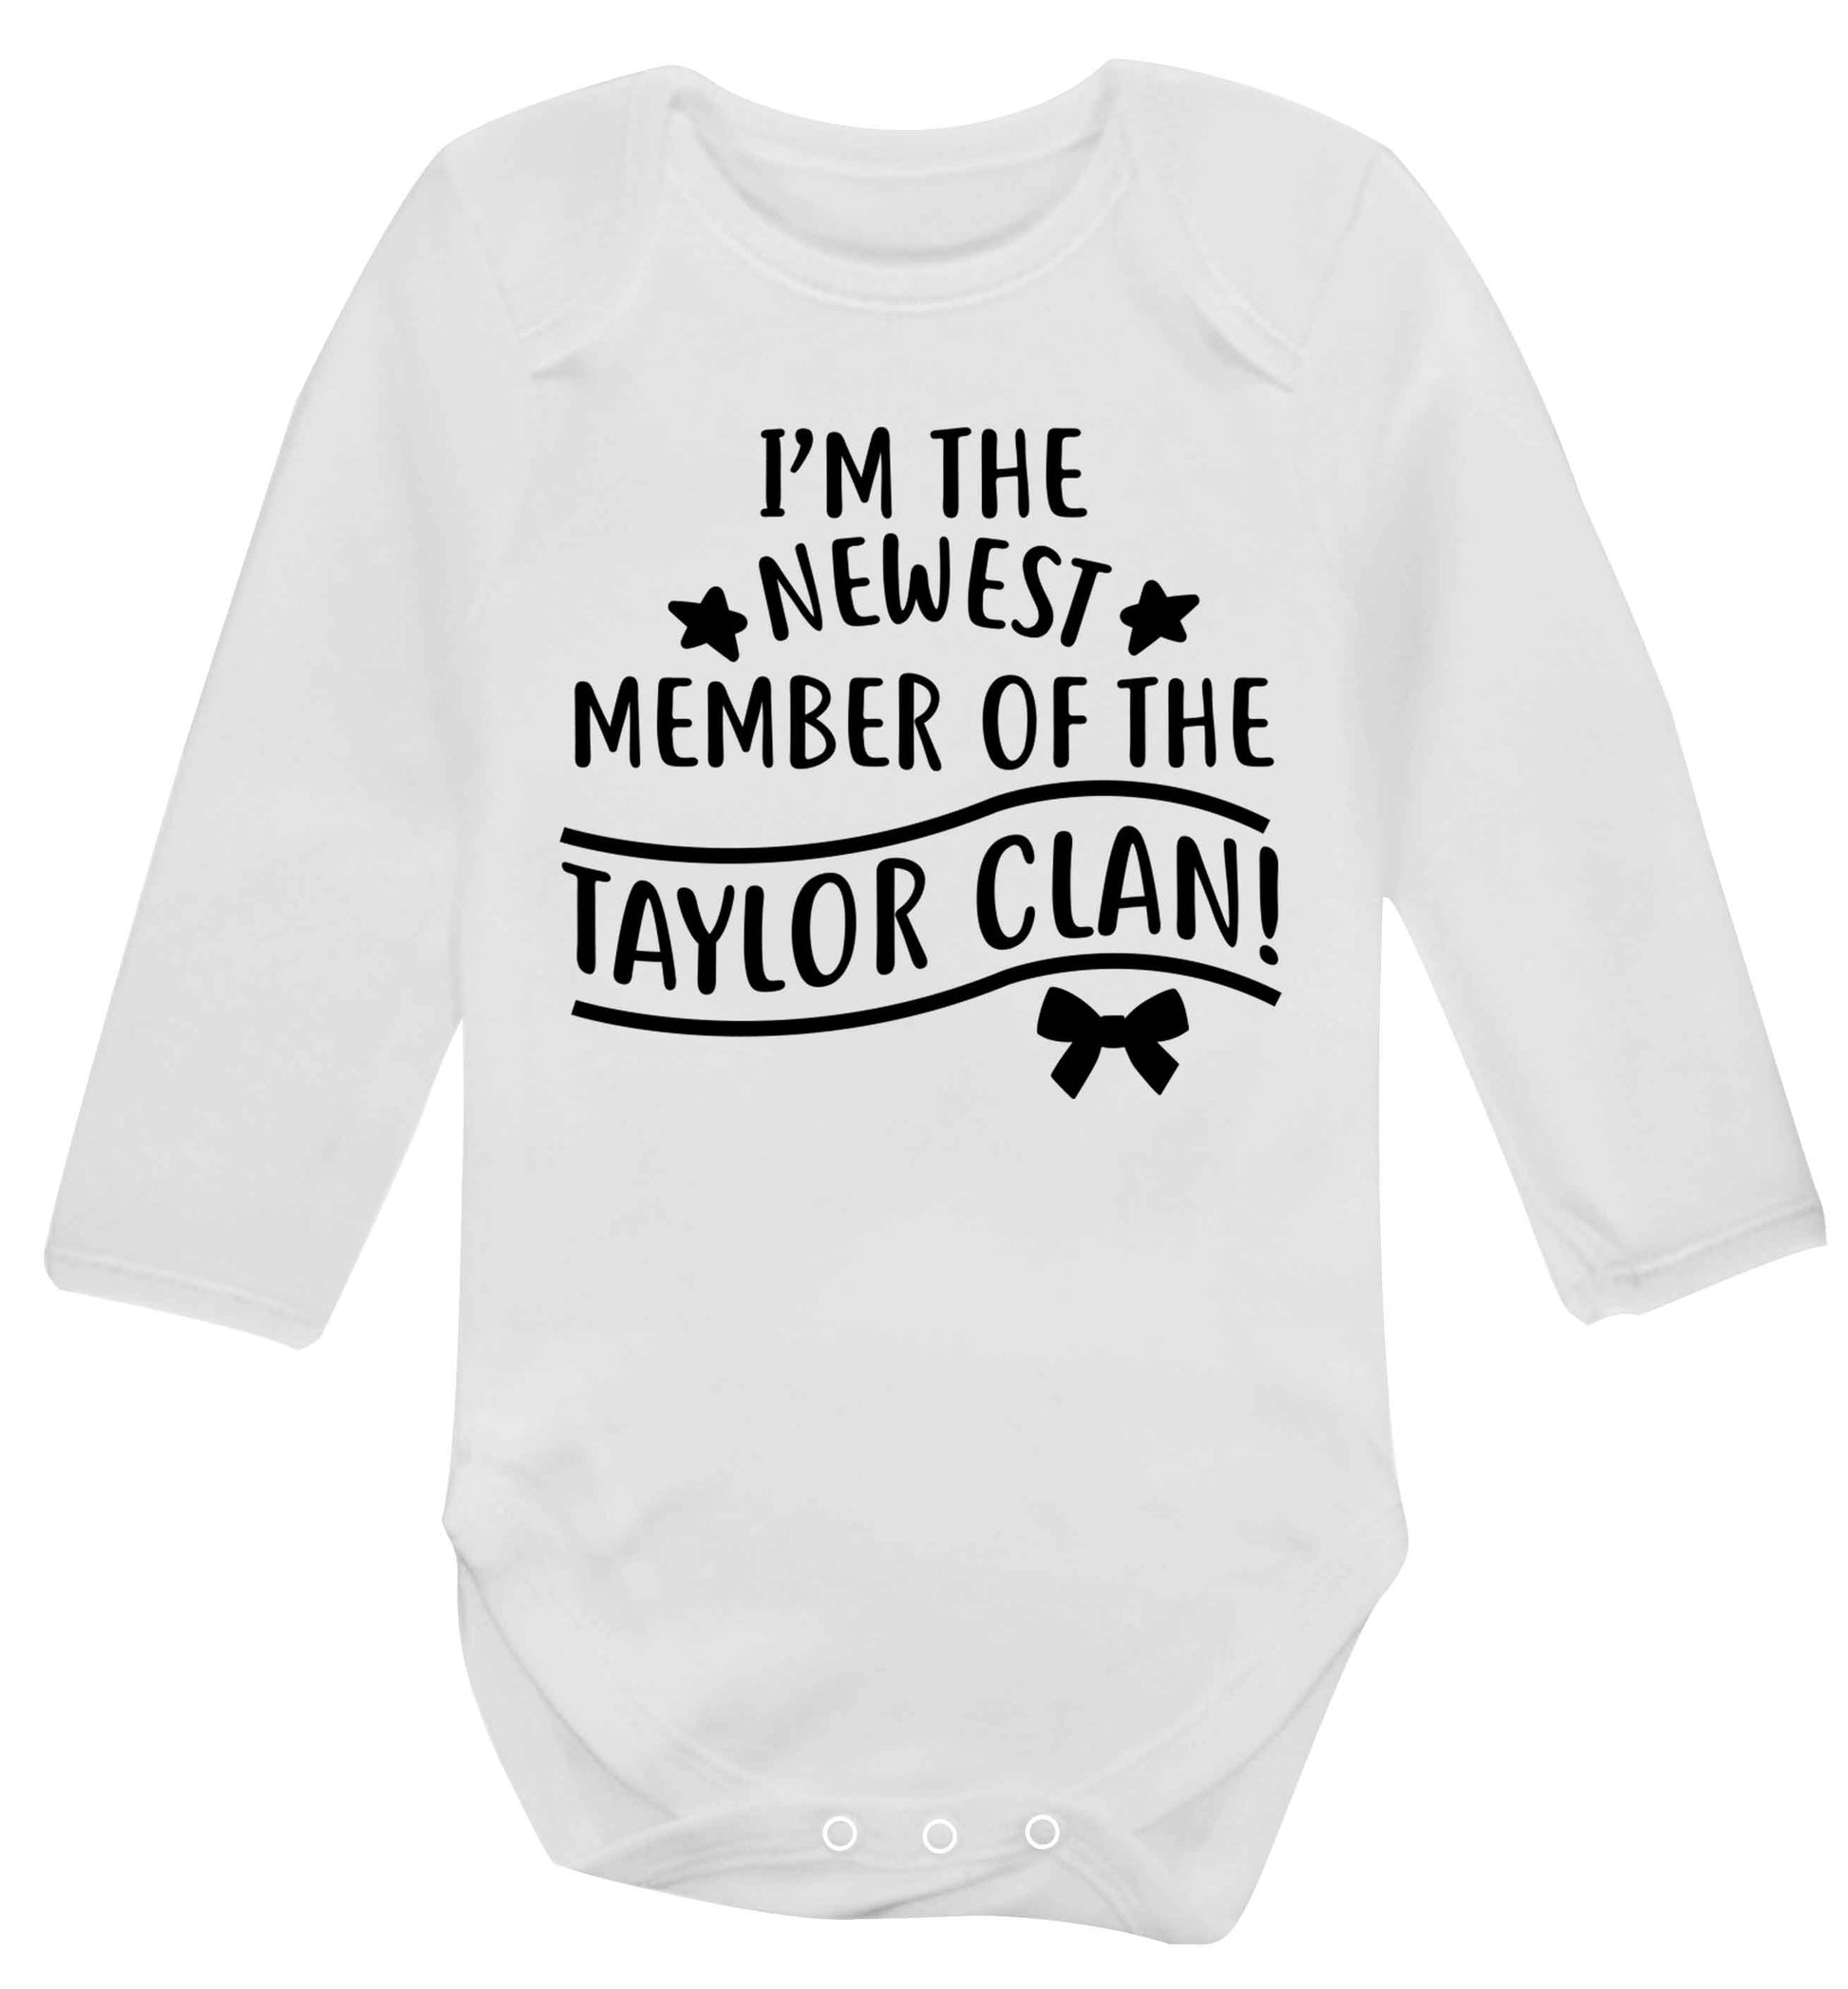 Personalised, newest member of the Taylor clan Baby Vest long sleeved white 6-12 months